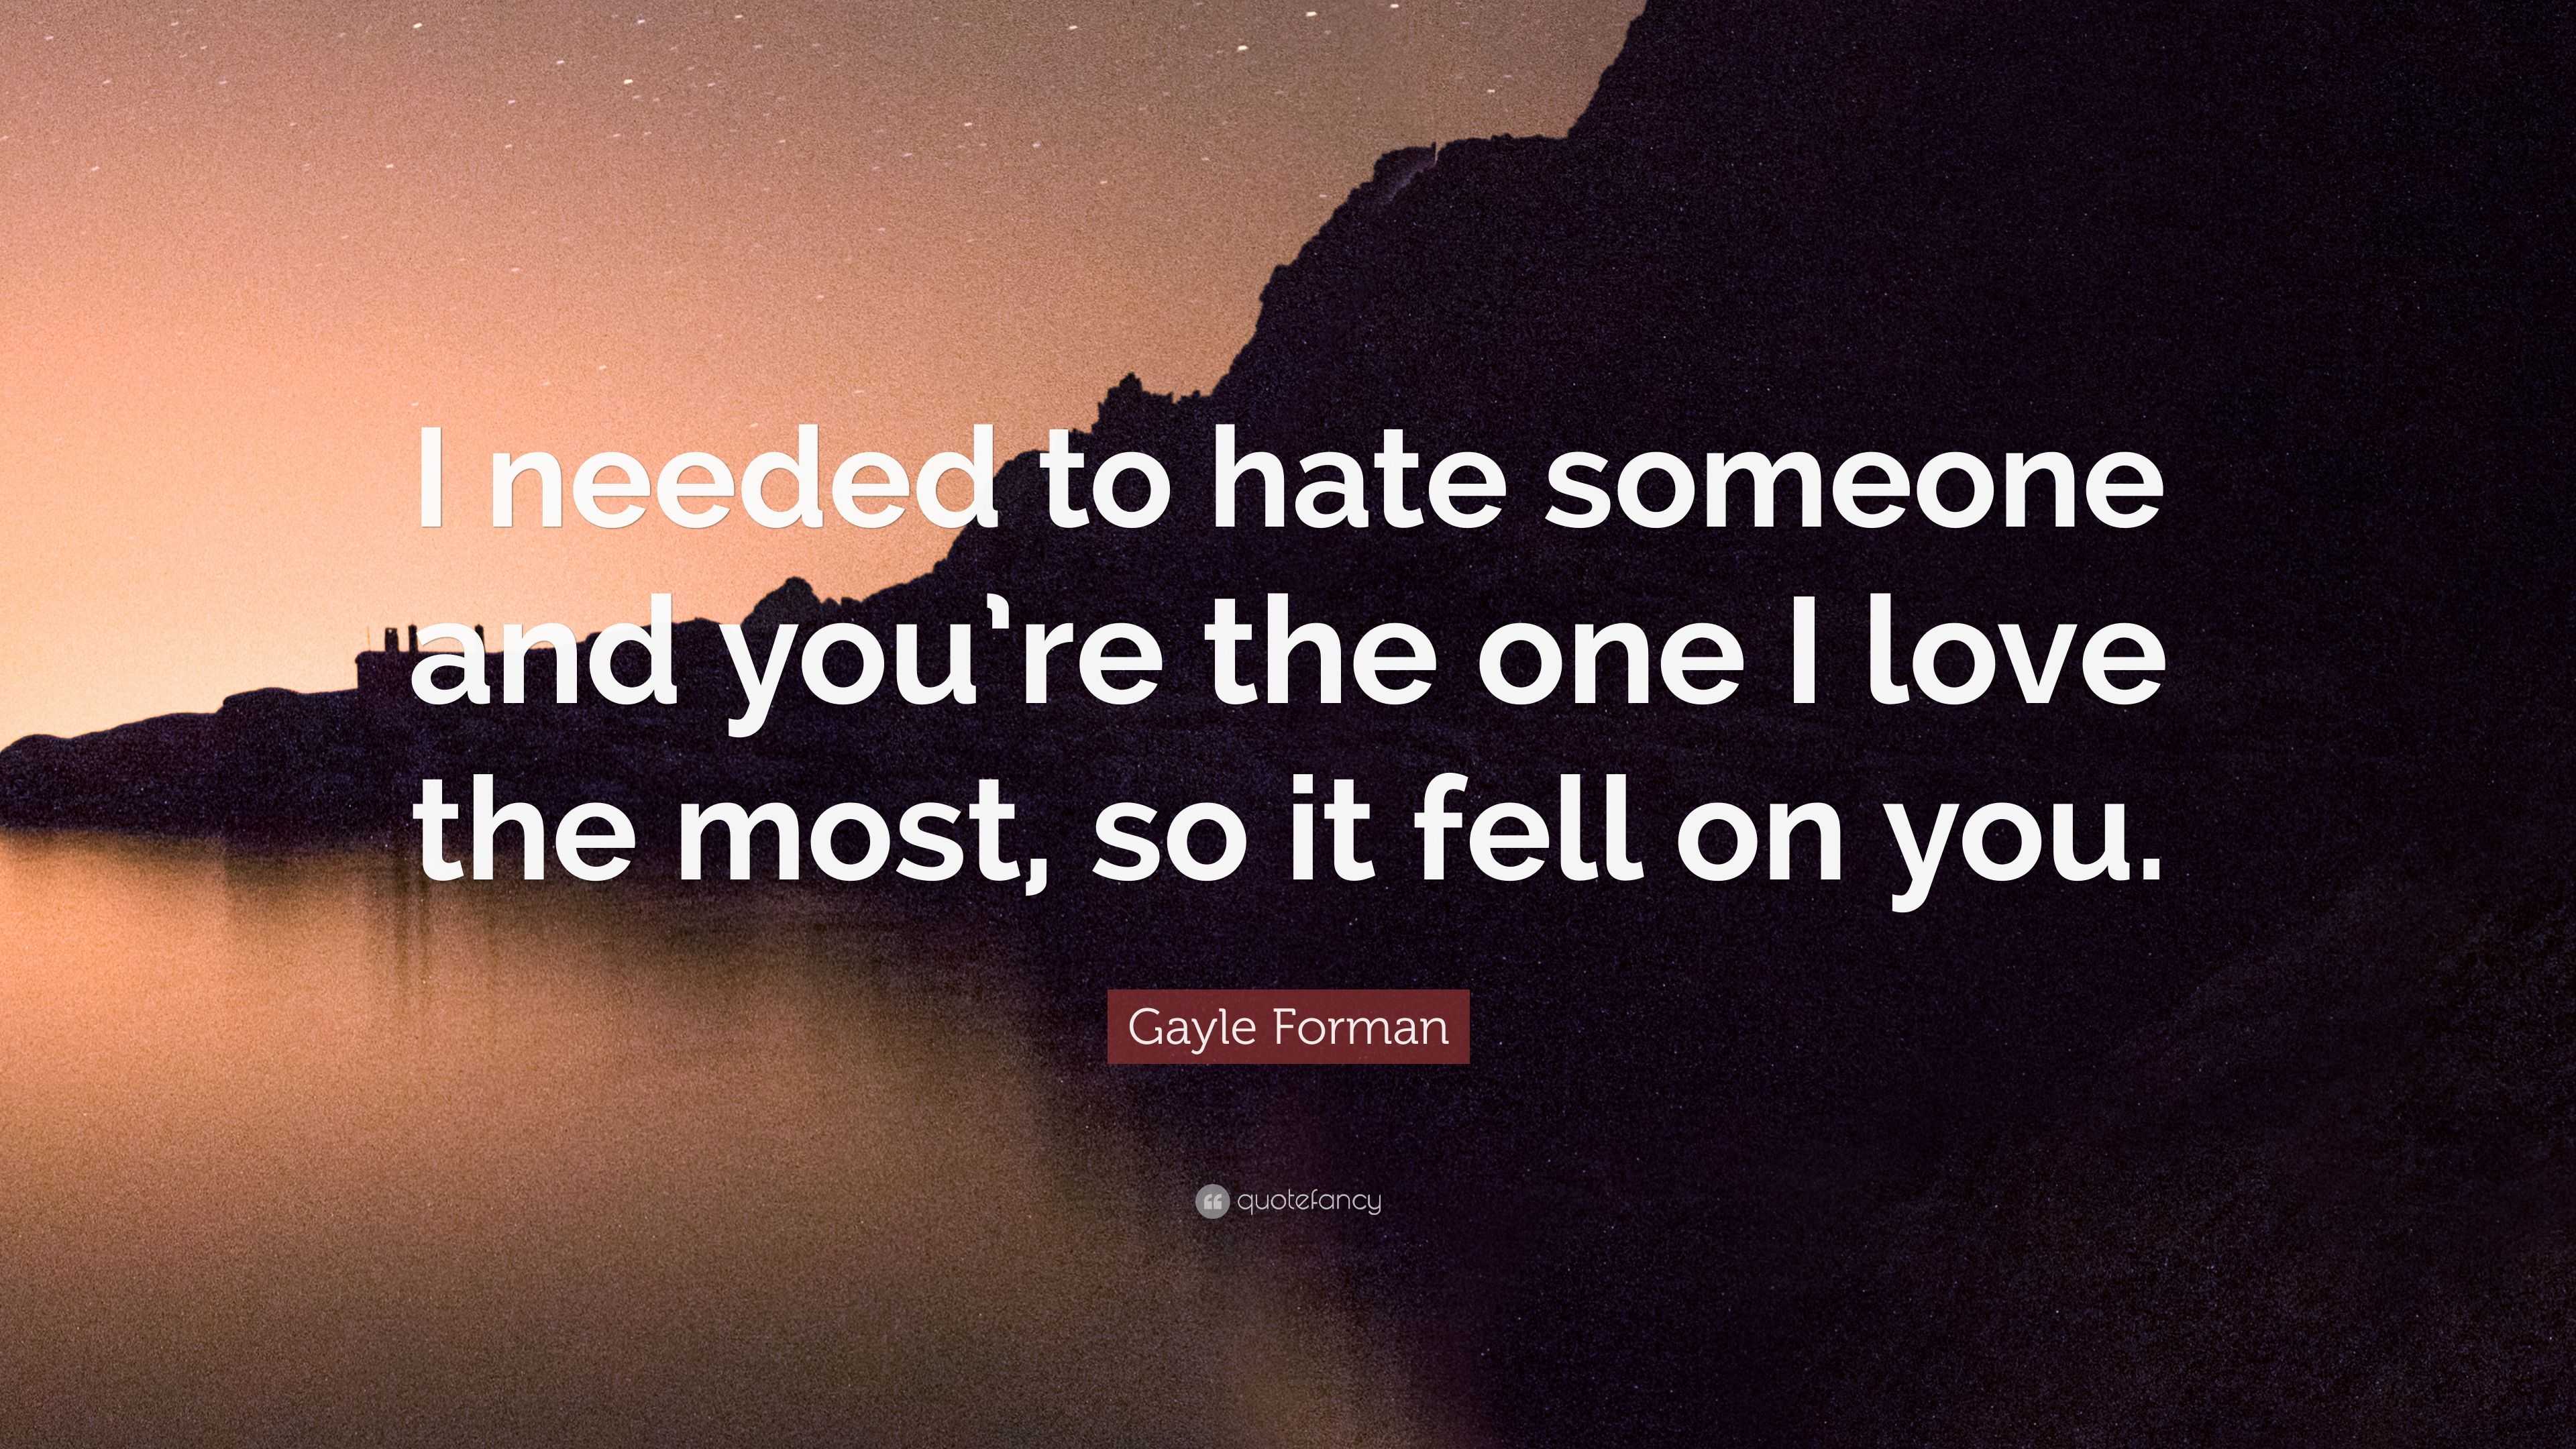 Gayle Forman Quote “I needed to hate someone and you re the one